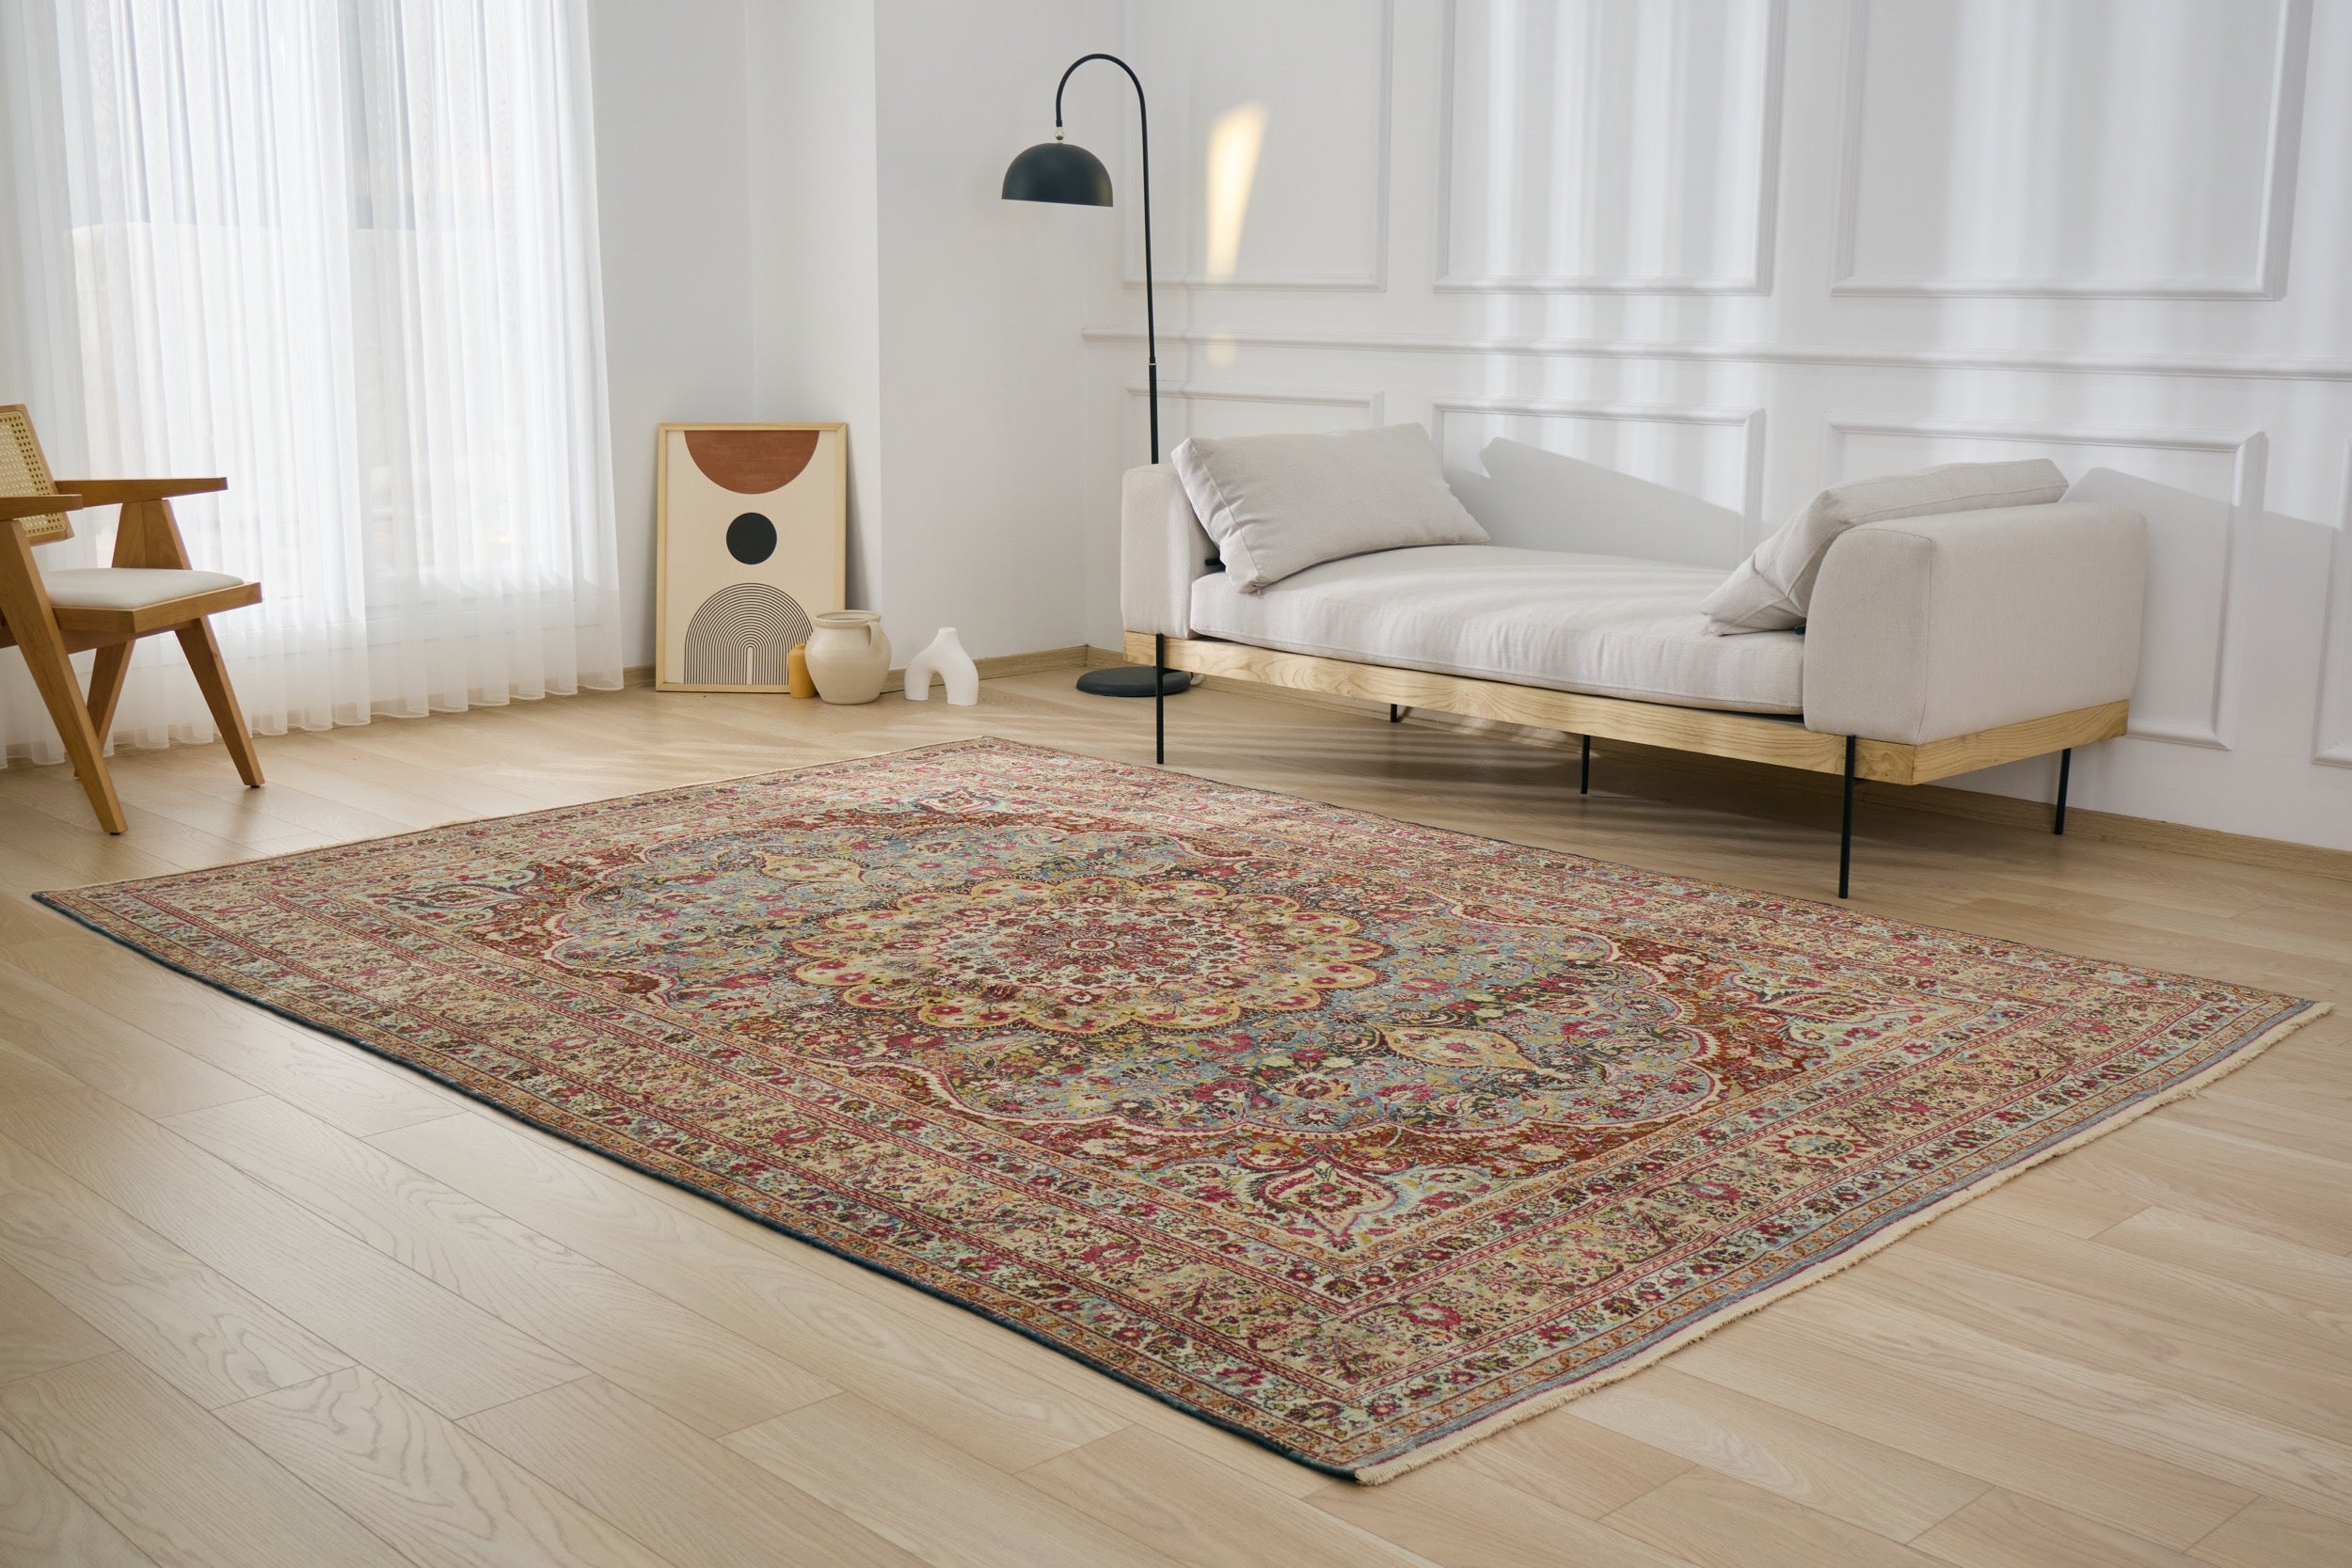 Caidie - Medallion Beauty, Timeless Craft | Kuden Rugs